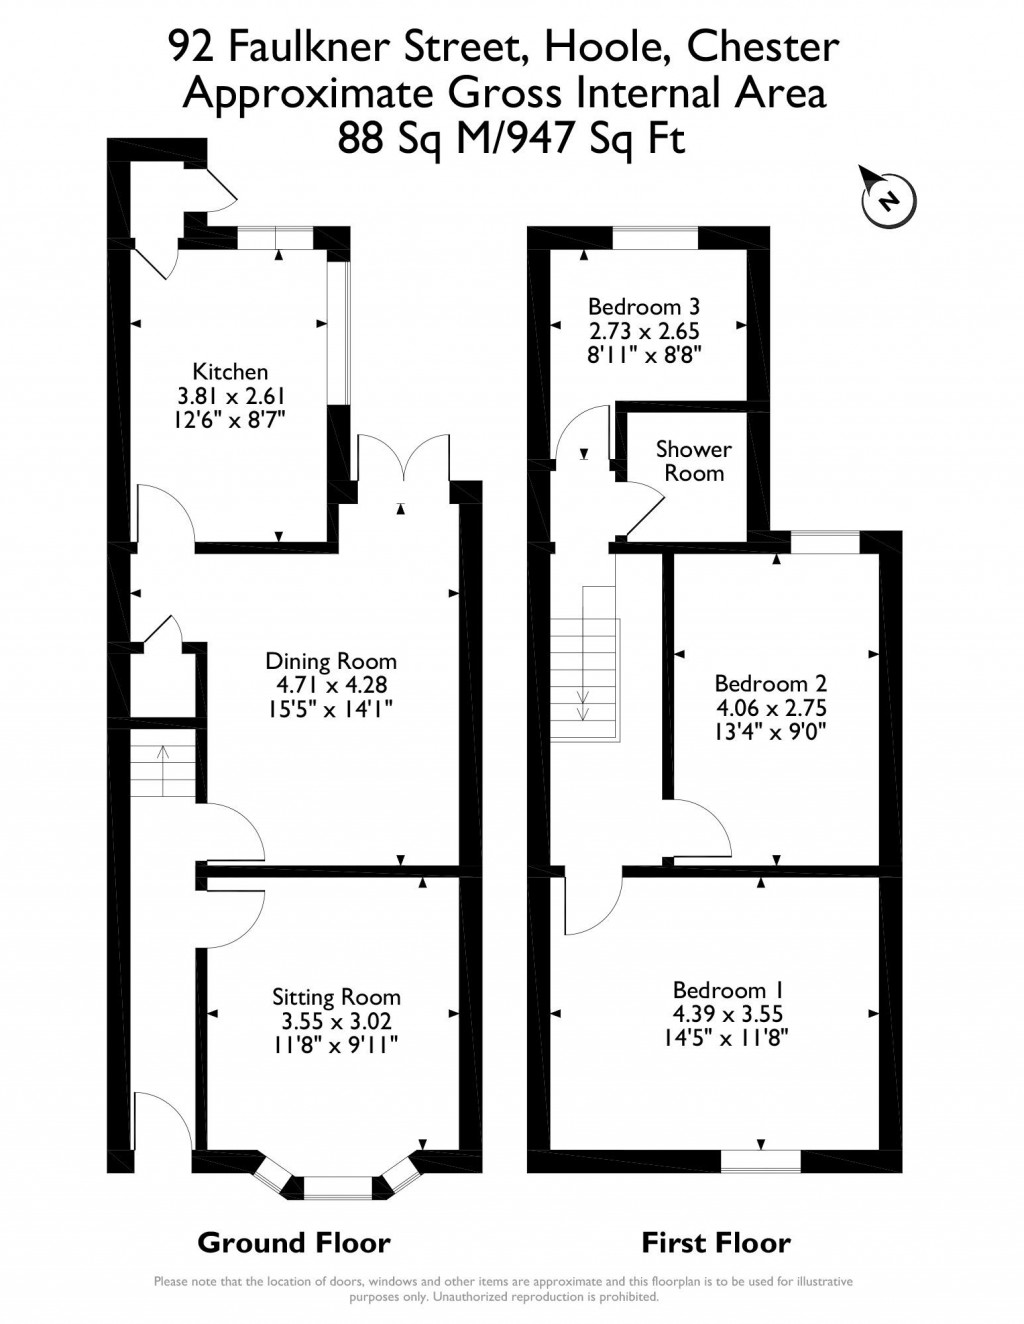 Floorplans For Hoole, Chester